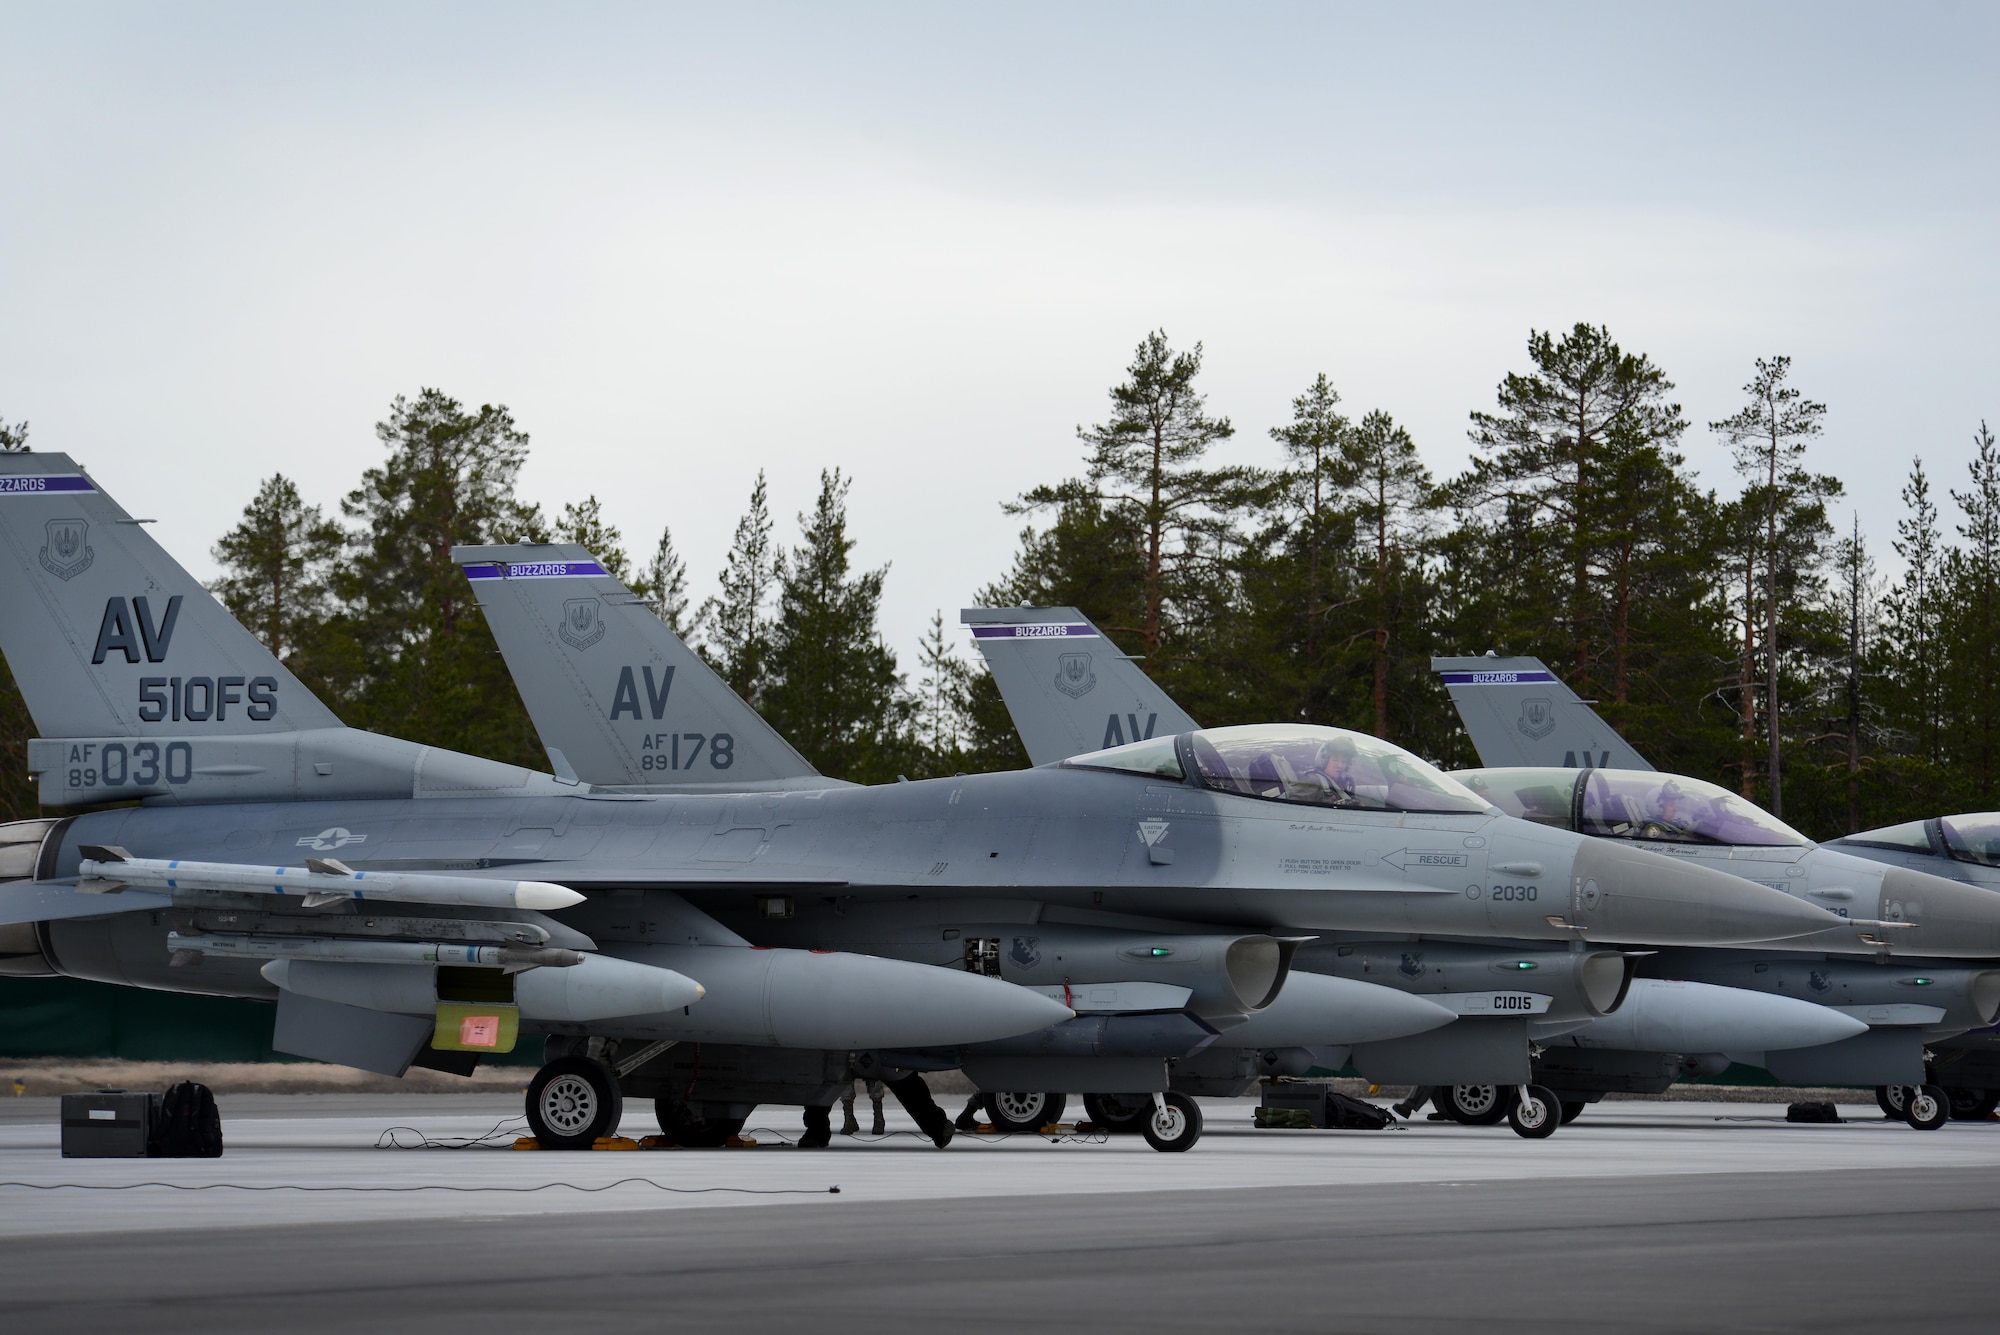 F-16 Fighting Falcons and Airmen from the 510th Fighter Squadron at Aviano Air Base, Italy, arrived at Kallax Air Base, Sweden, May 22, 2015, for Arctic Challenge Exercise 2015. Nine nations participated during the exercise to help ensure interoperability, and strengthen relationships and engagements with NATO allies and Partners for Peace. (U.S. Air Force photo/Staff Sgt. Evelyn Chavez)